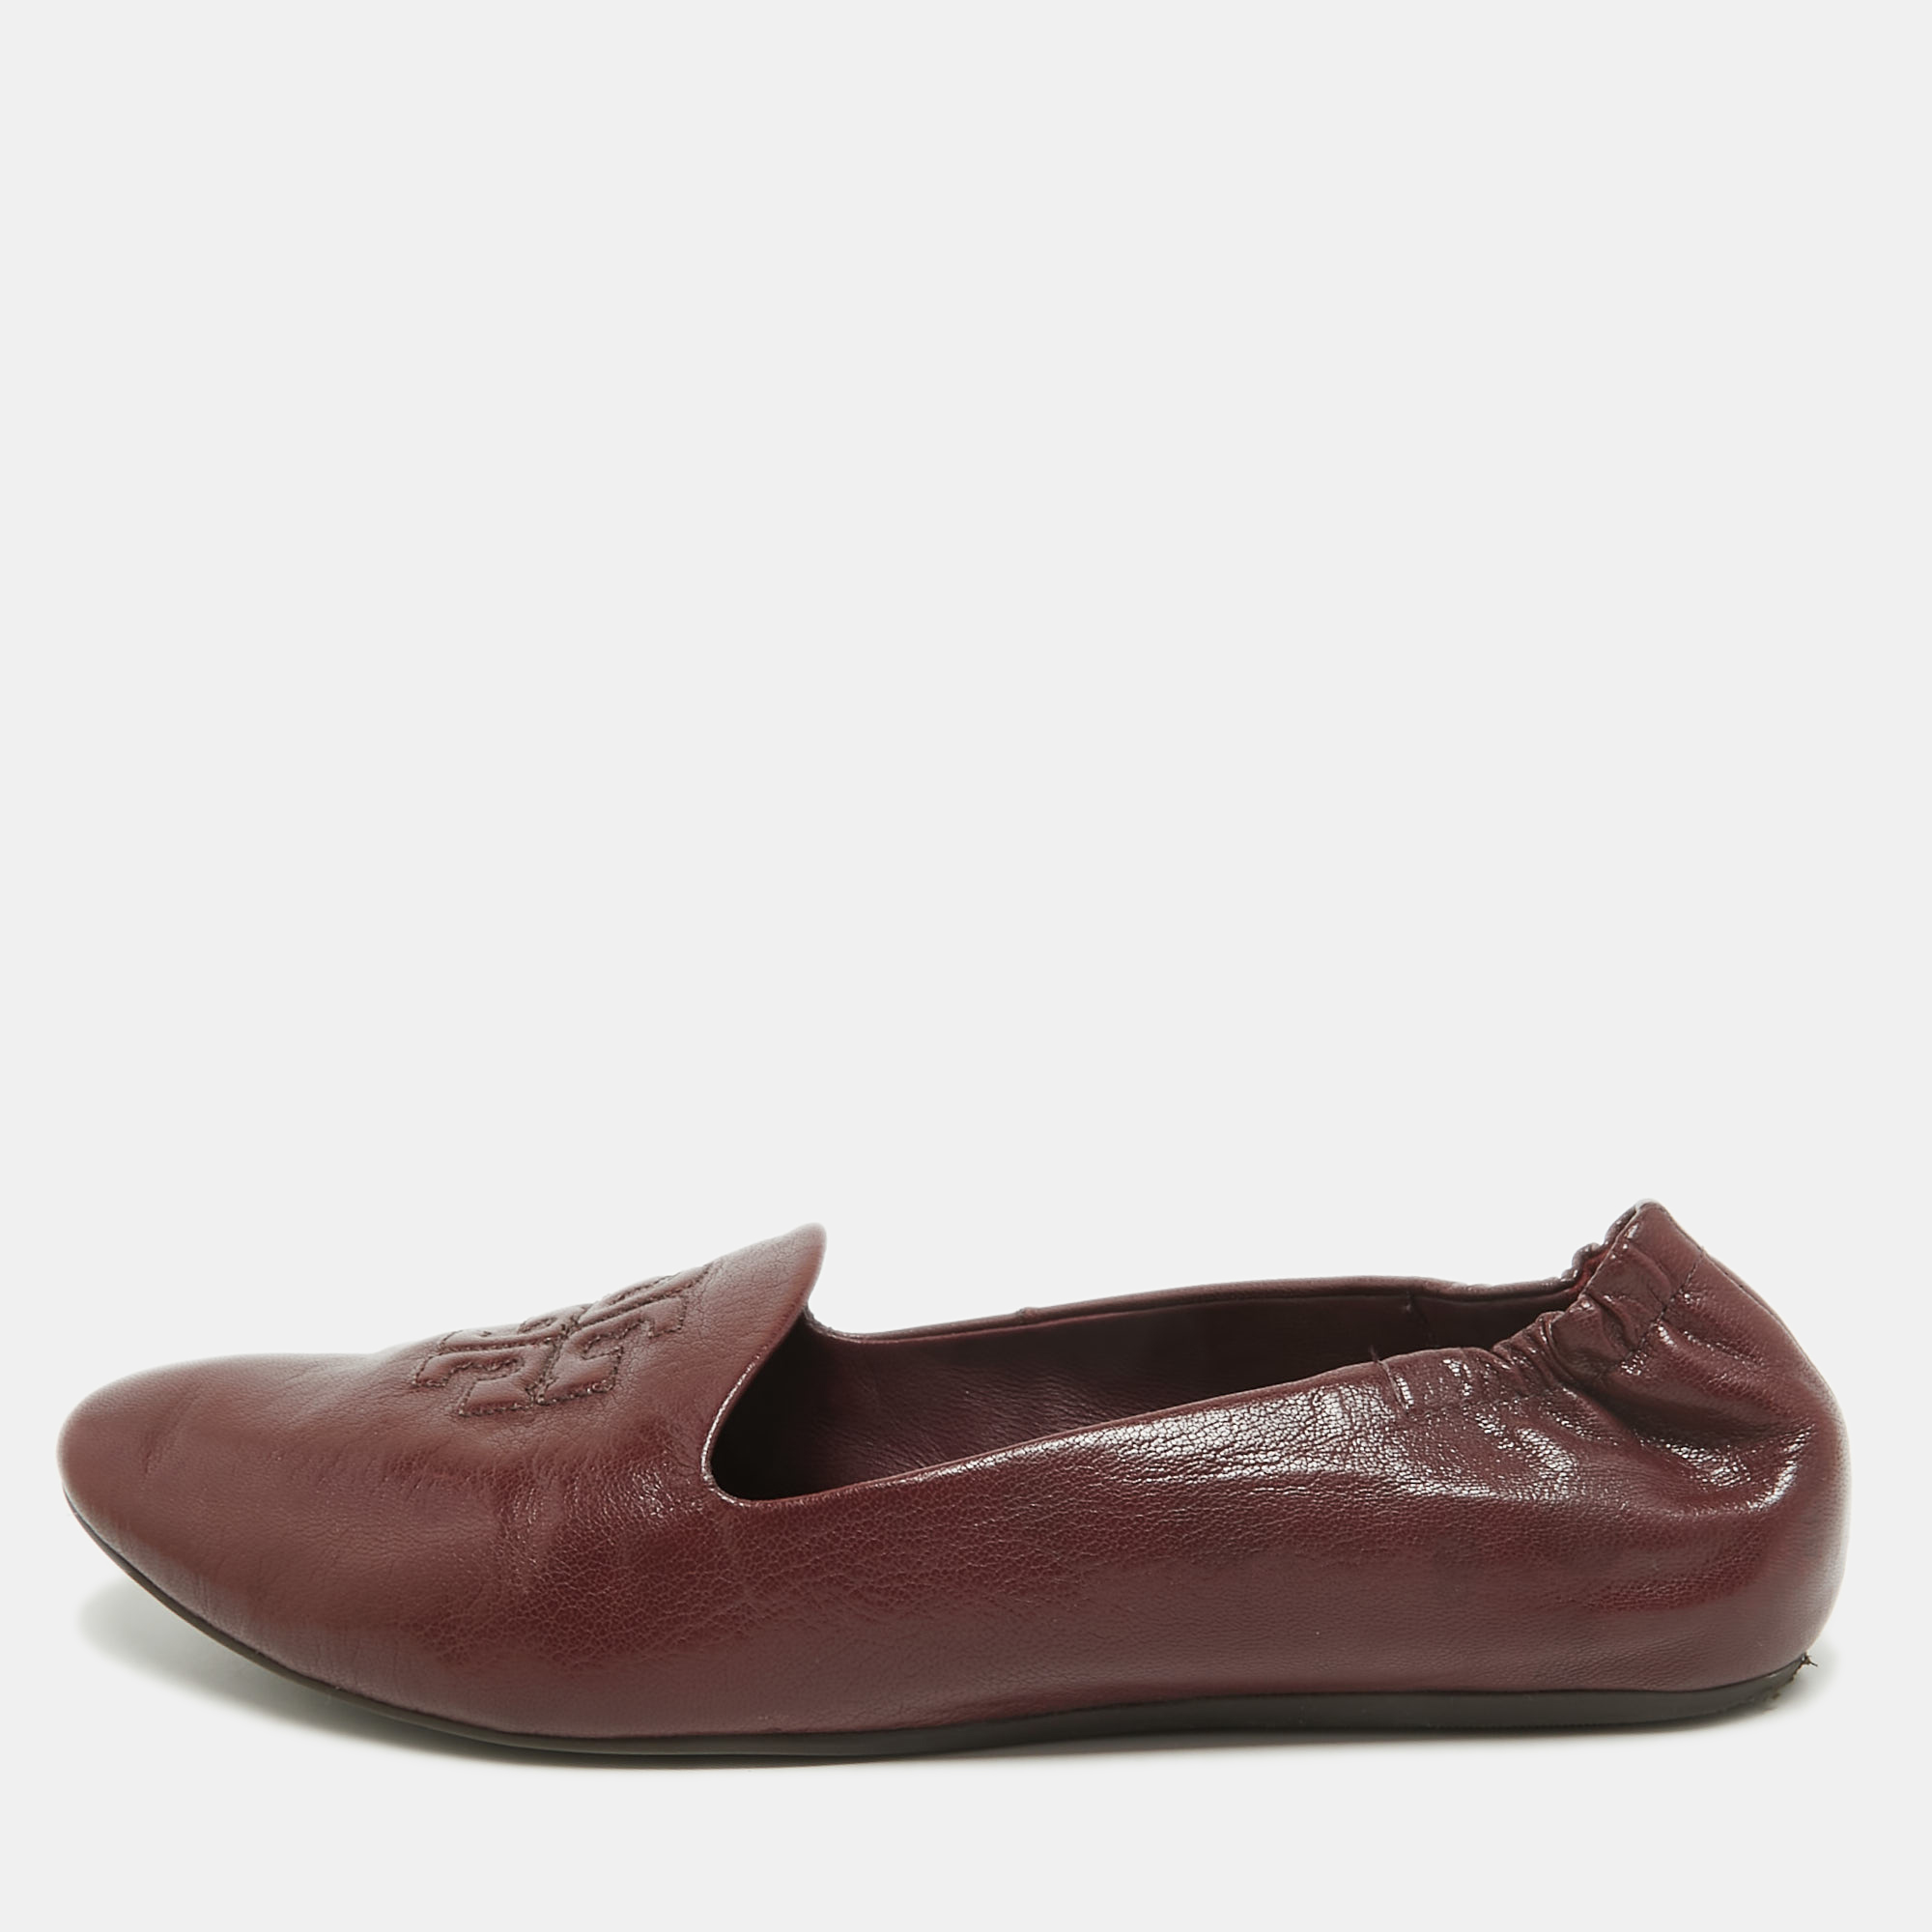 Pre-owned Tory Burch Burgundy Leather Scrunch Reva Ballet Flats Size 38